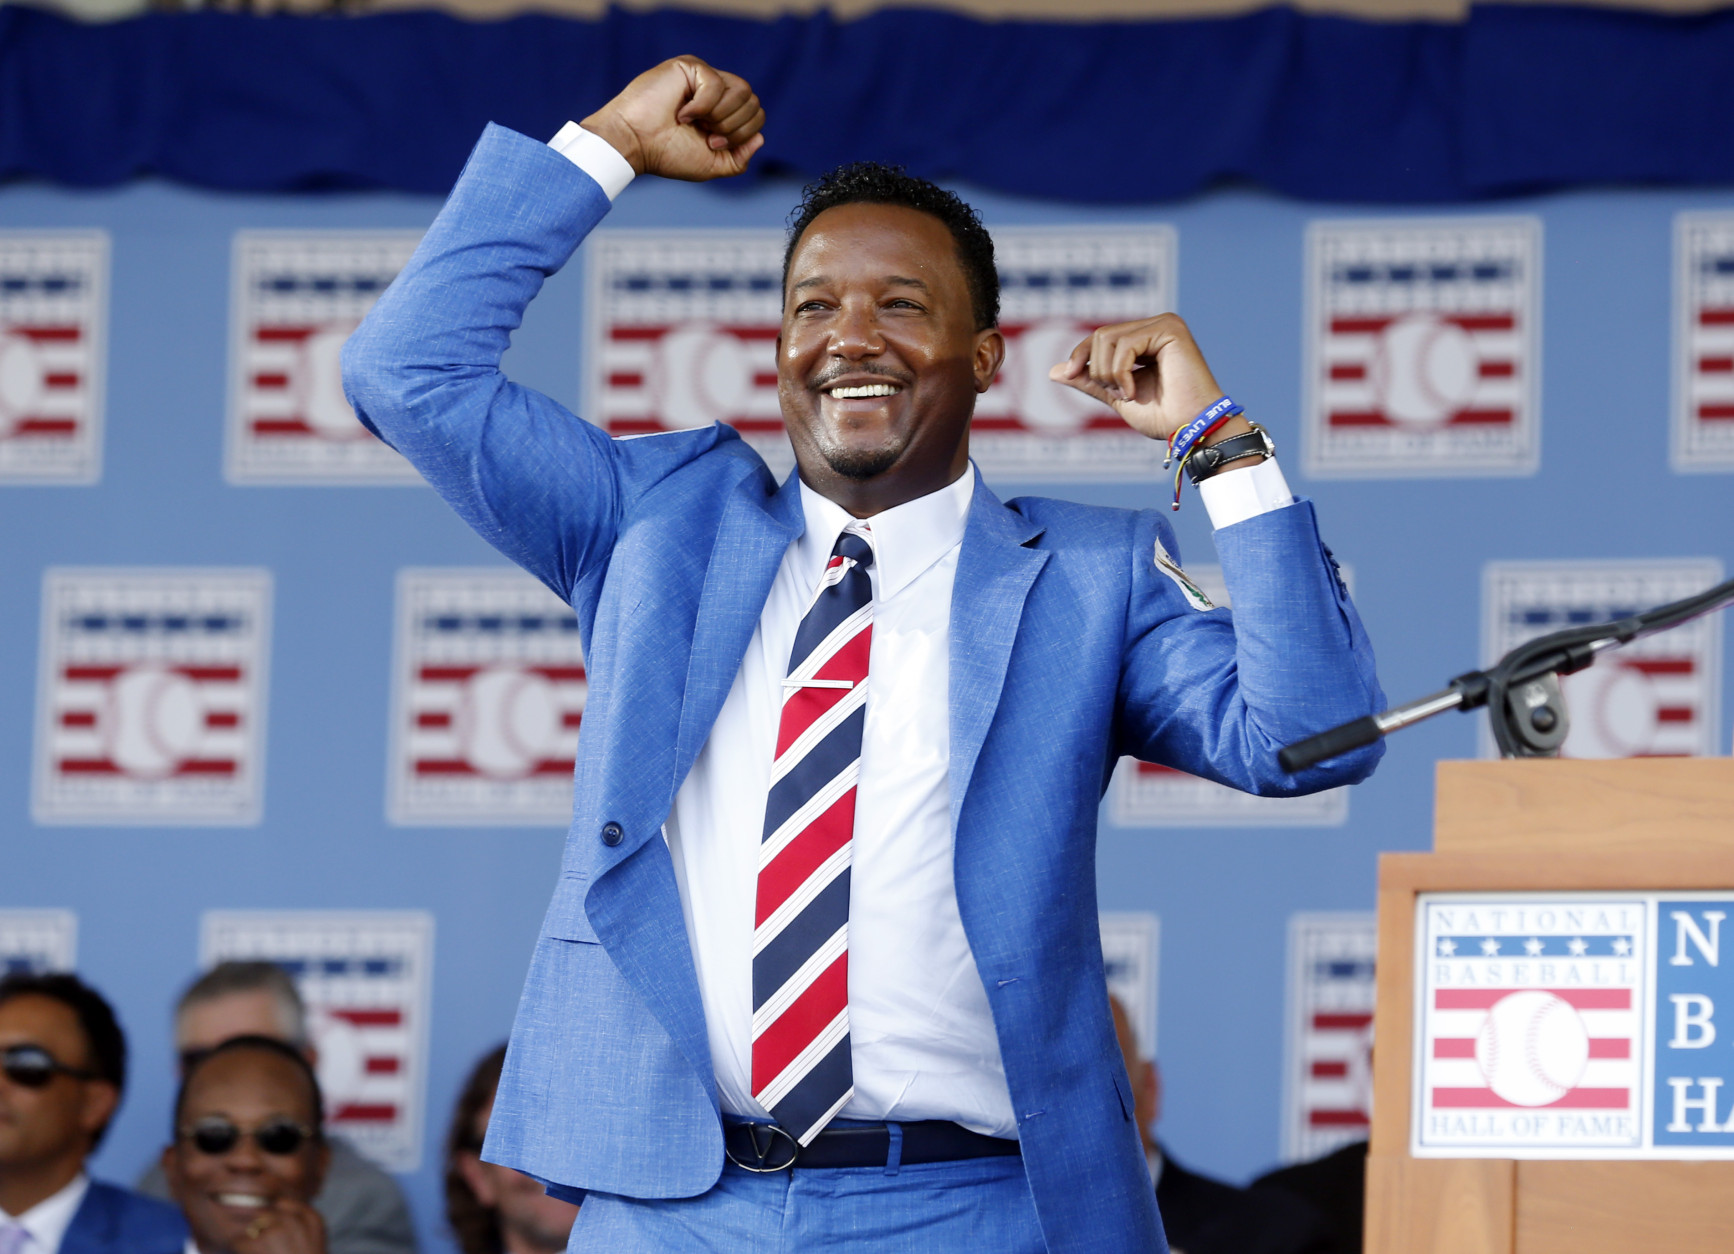 National Baseball Hall of Fame inductee Pedro Martinez  is introduced during an induction ceremony at the Clark Sports Center on Sunday, July 26, 2015, in Cooperstown, N.Y. (AP Photo/Mike Groll)